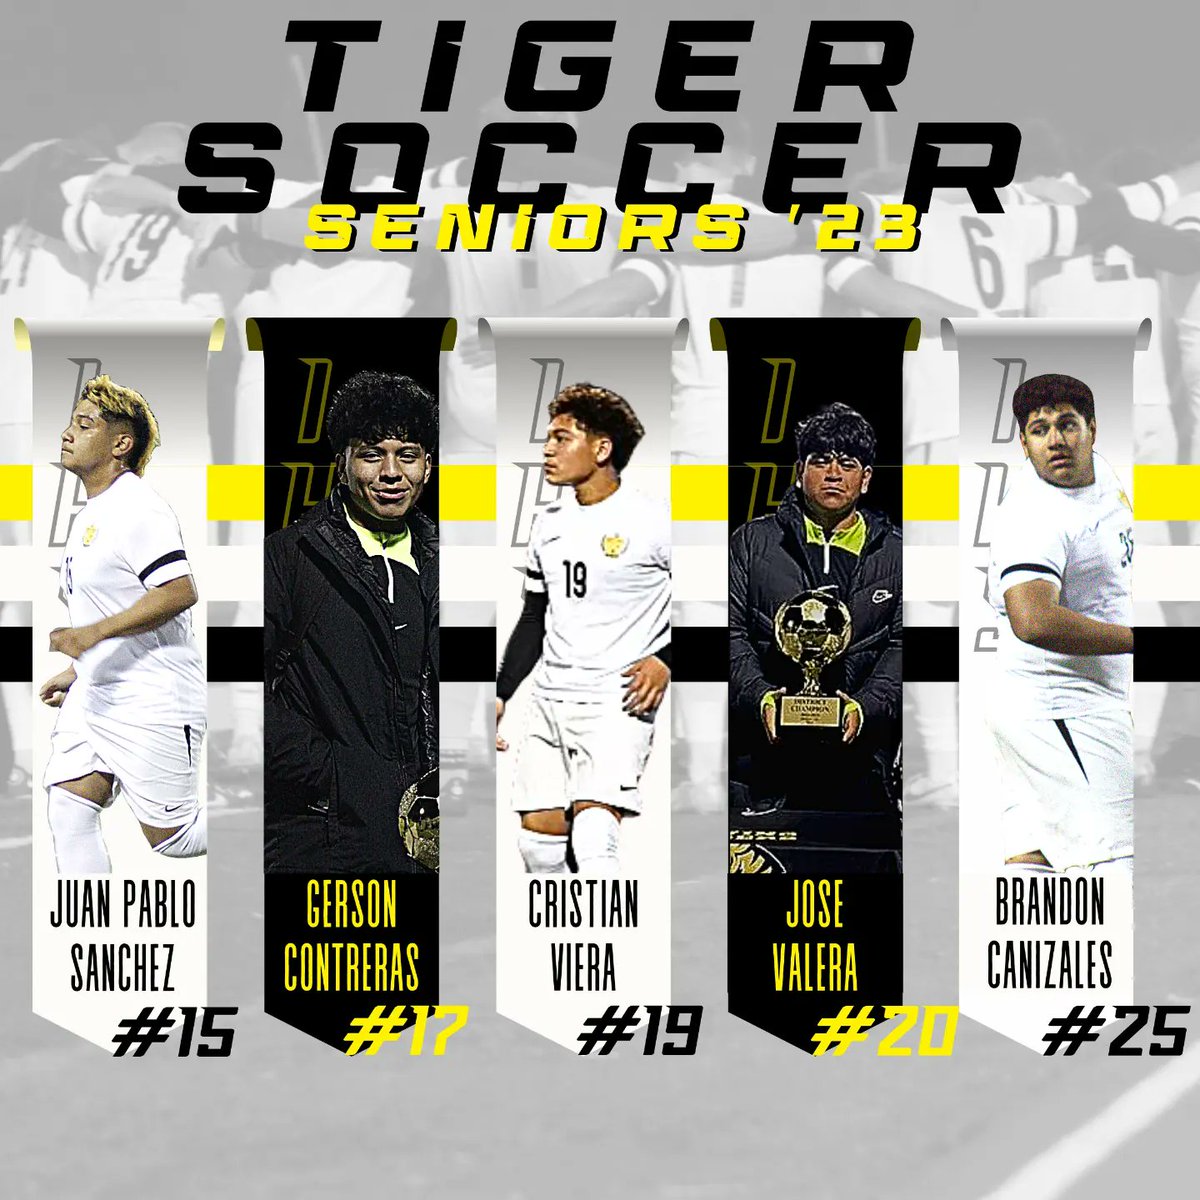 Senior Spotlight!

Tomorrow is their last home game. Come out and support!! 

#TigerSoccer #OnTheHunt #District76A #TexasTornadoDesigns @sambacker61 @IrvingHigh @IrvingISD @IISDAthletics @coach_coronado7 @CoachRobIHS @marketingihs